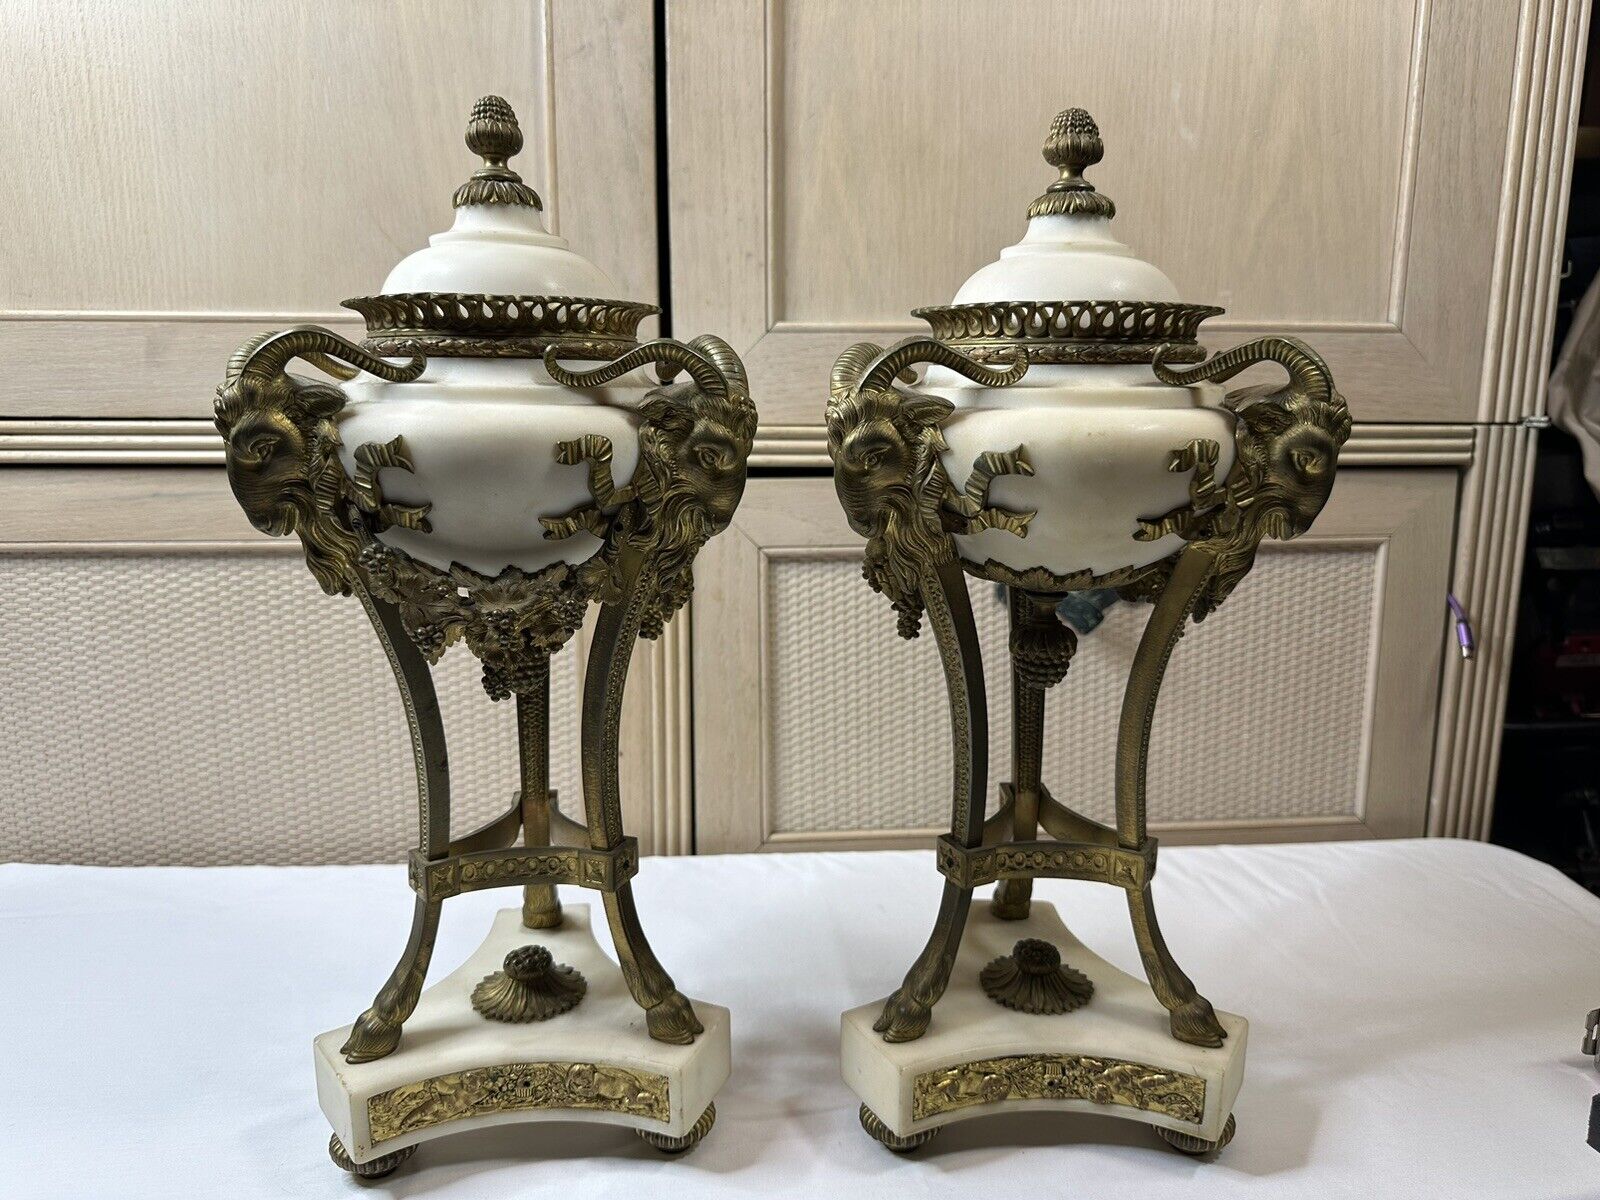 Pair Of Brass And Marble Candle Holders | Ornate Brass Candle Holders Vintage